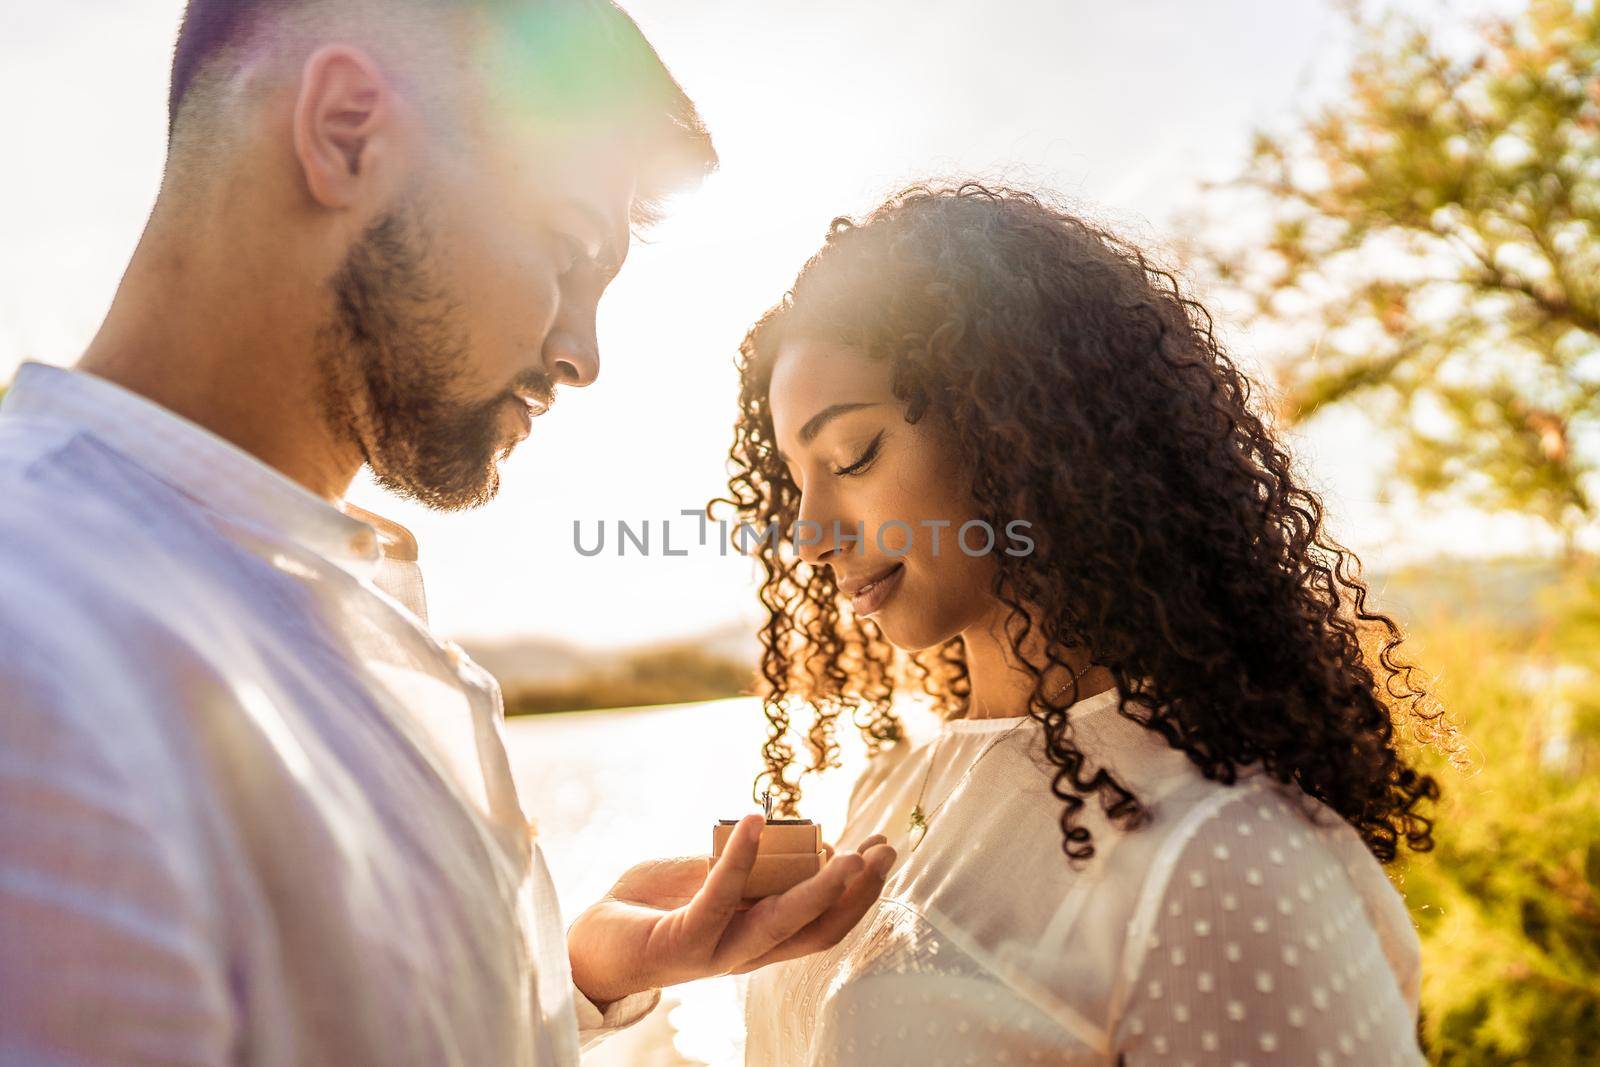 Backlit suggestive romance scene of young beautiful multiracial couple in love. Handsome guy making the marriage proposal to her black Hispanic girlfriend showing engagement ring close to her